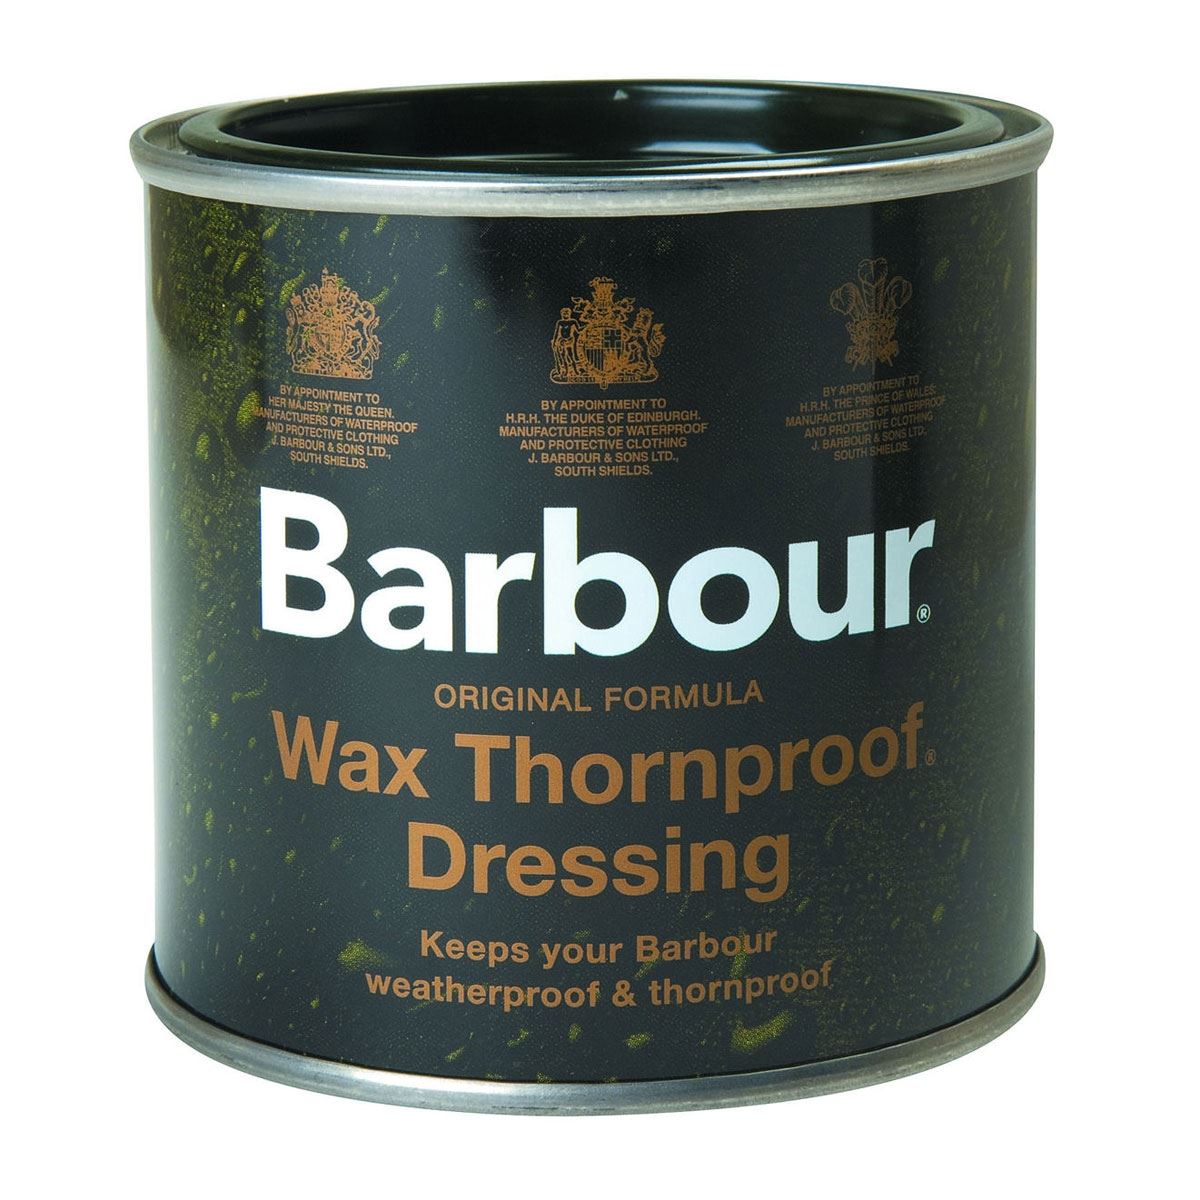 What is the reason for the order limit on Barbour Wax Thornproof Dressing?